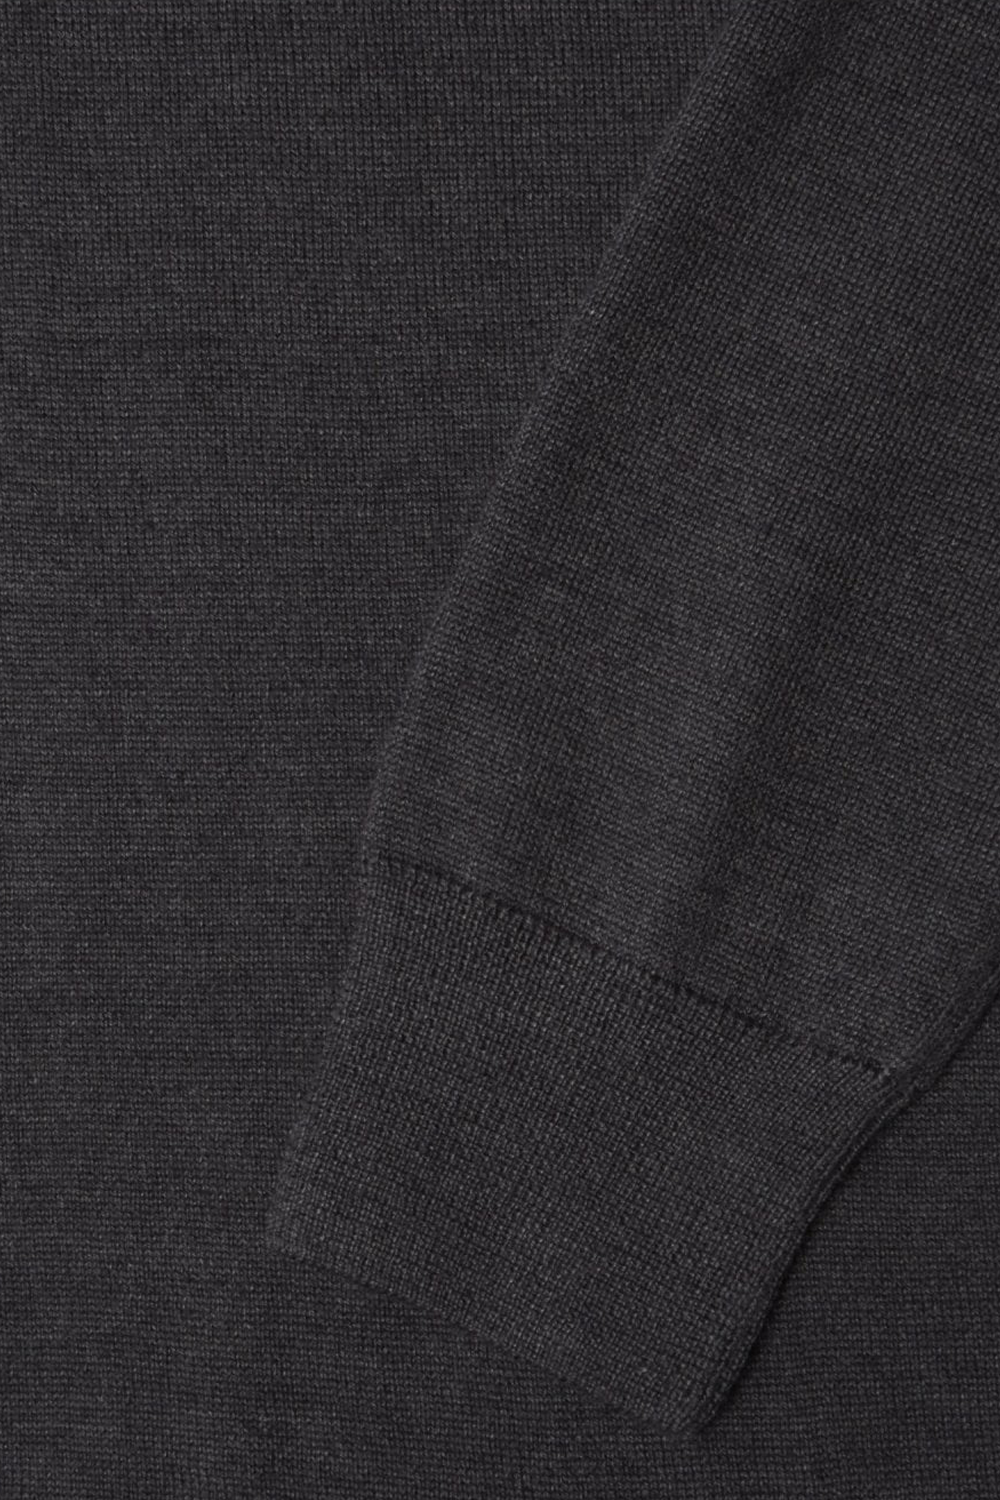 Buy the Remus Uomo L/S Turtle Neck Knitwear Dark Grey at Intro. Spend £50 for free UK delivery. Official stockists. We ship worldwide.